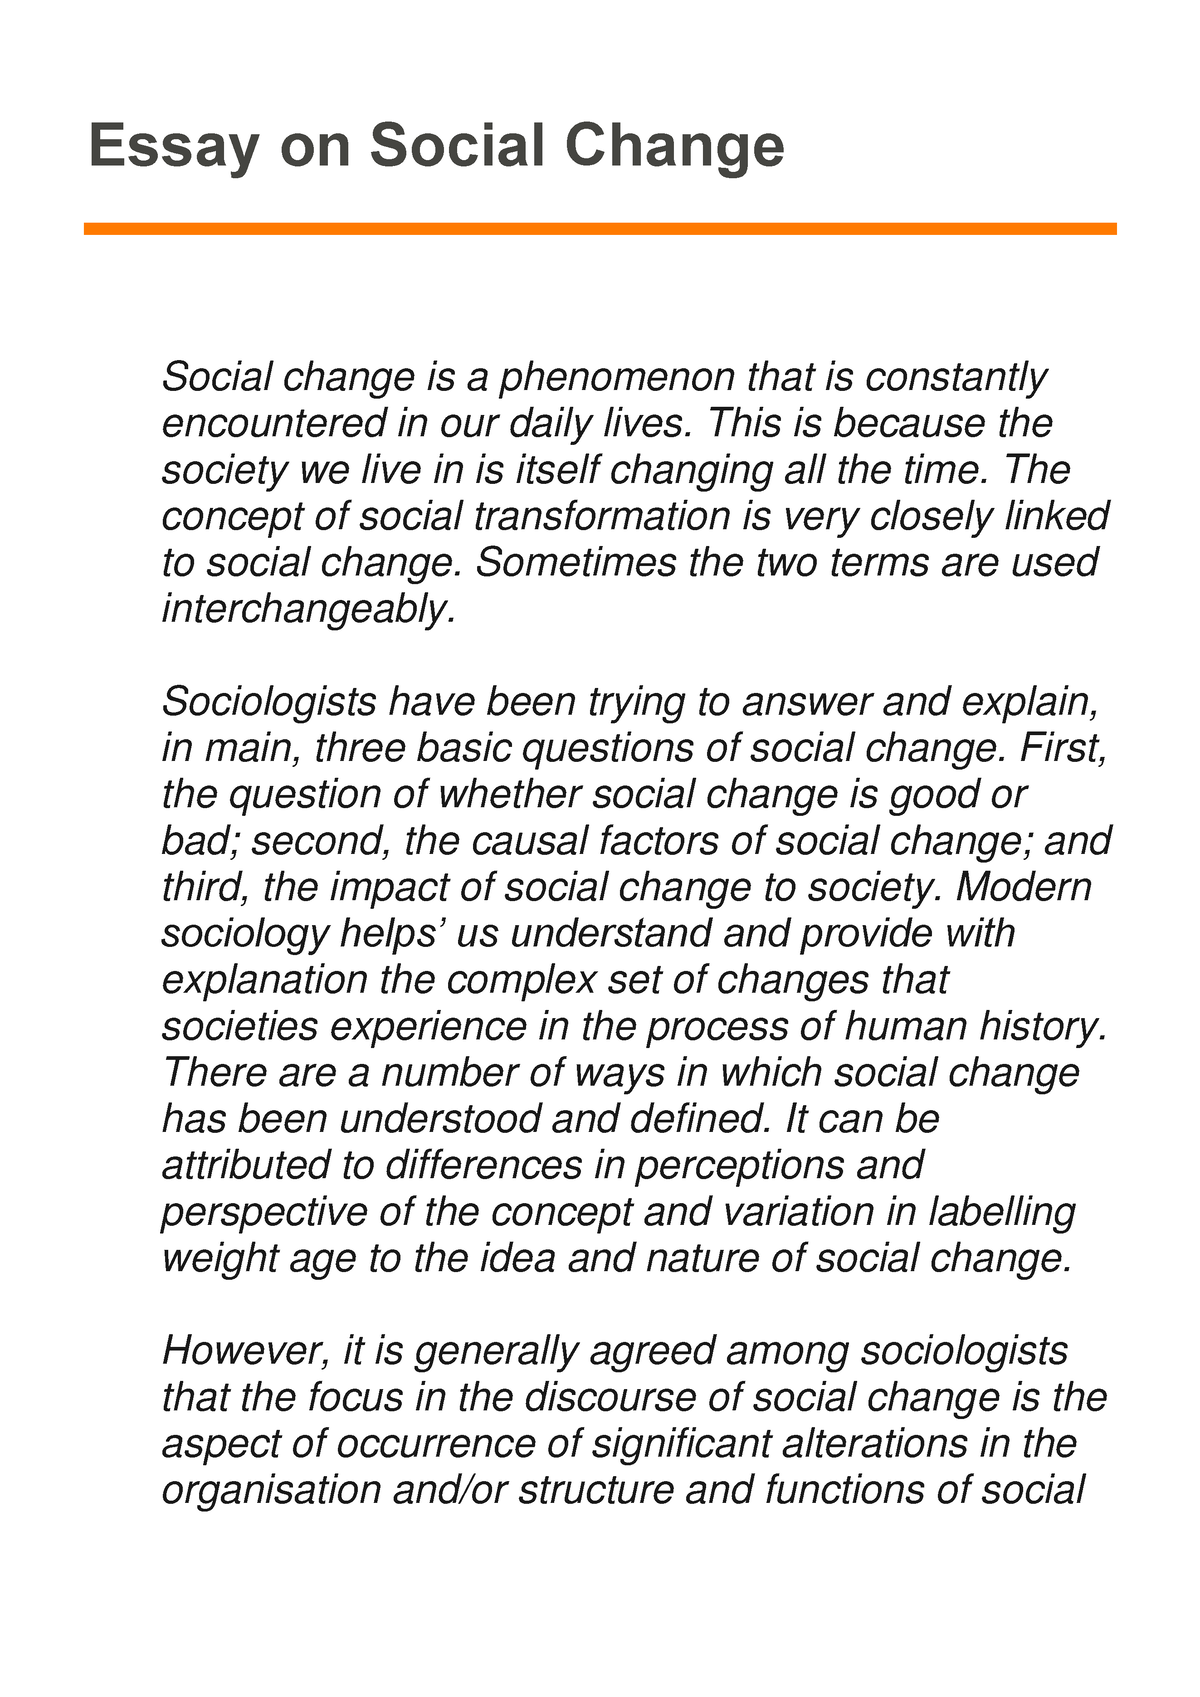 digital technology and social change essay